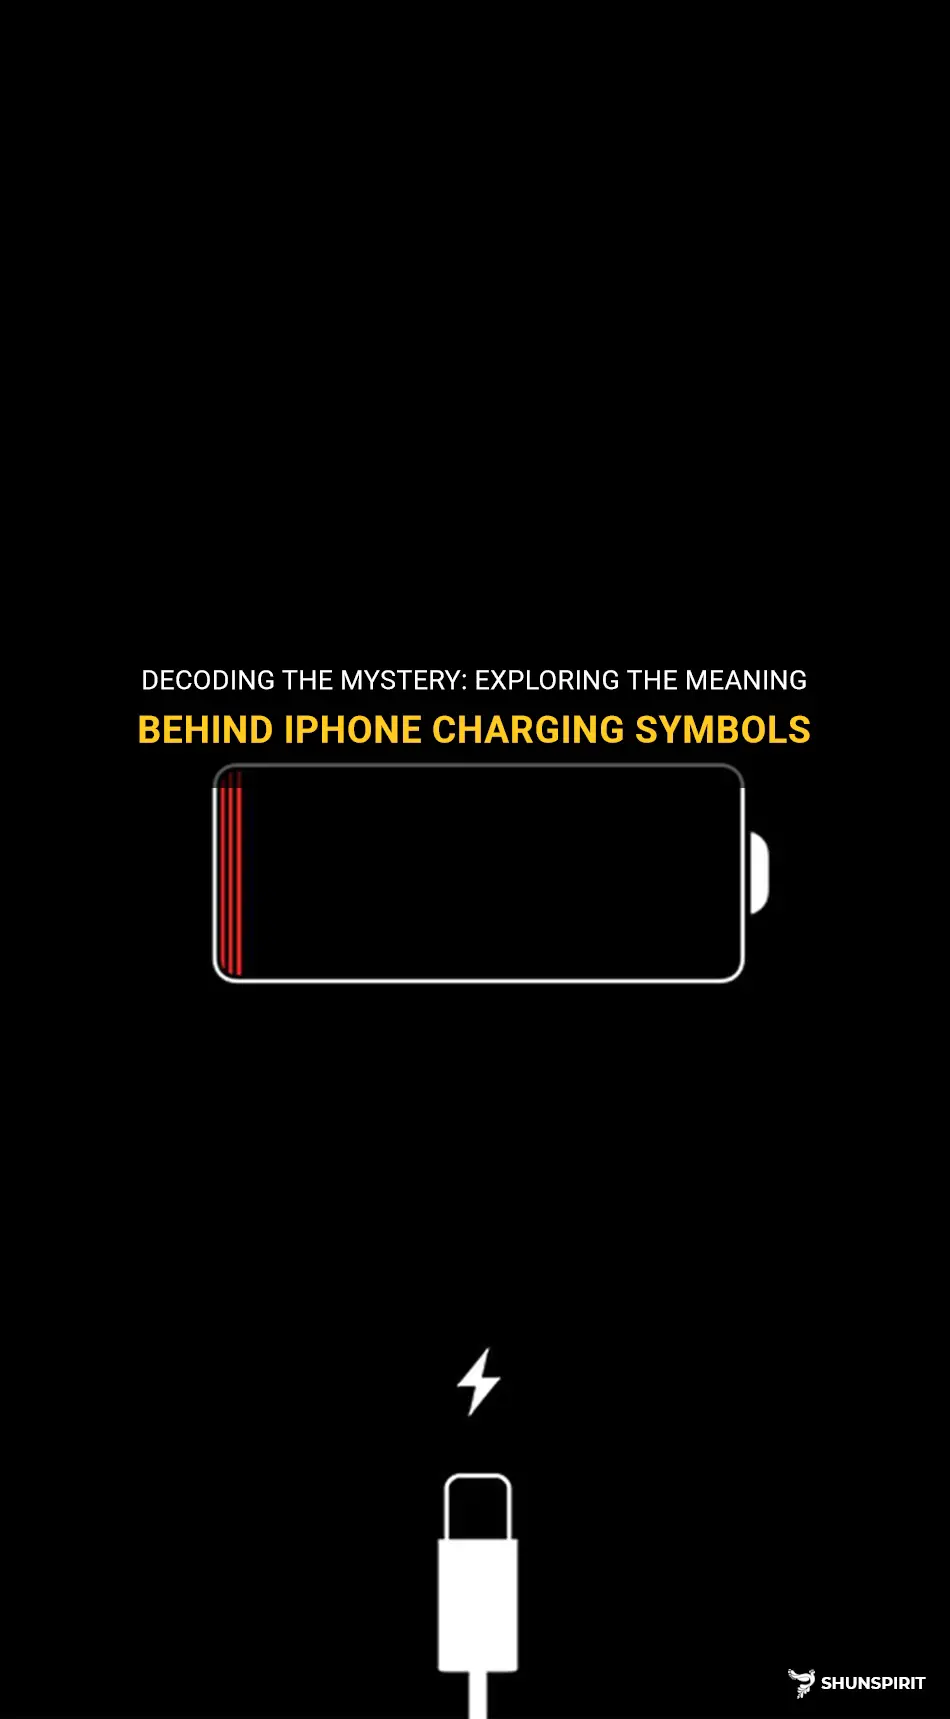 iphone charging symbols meaning